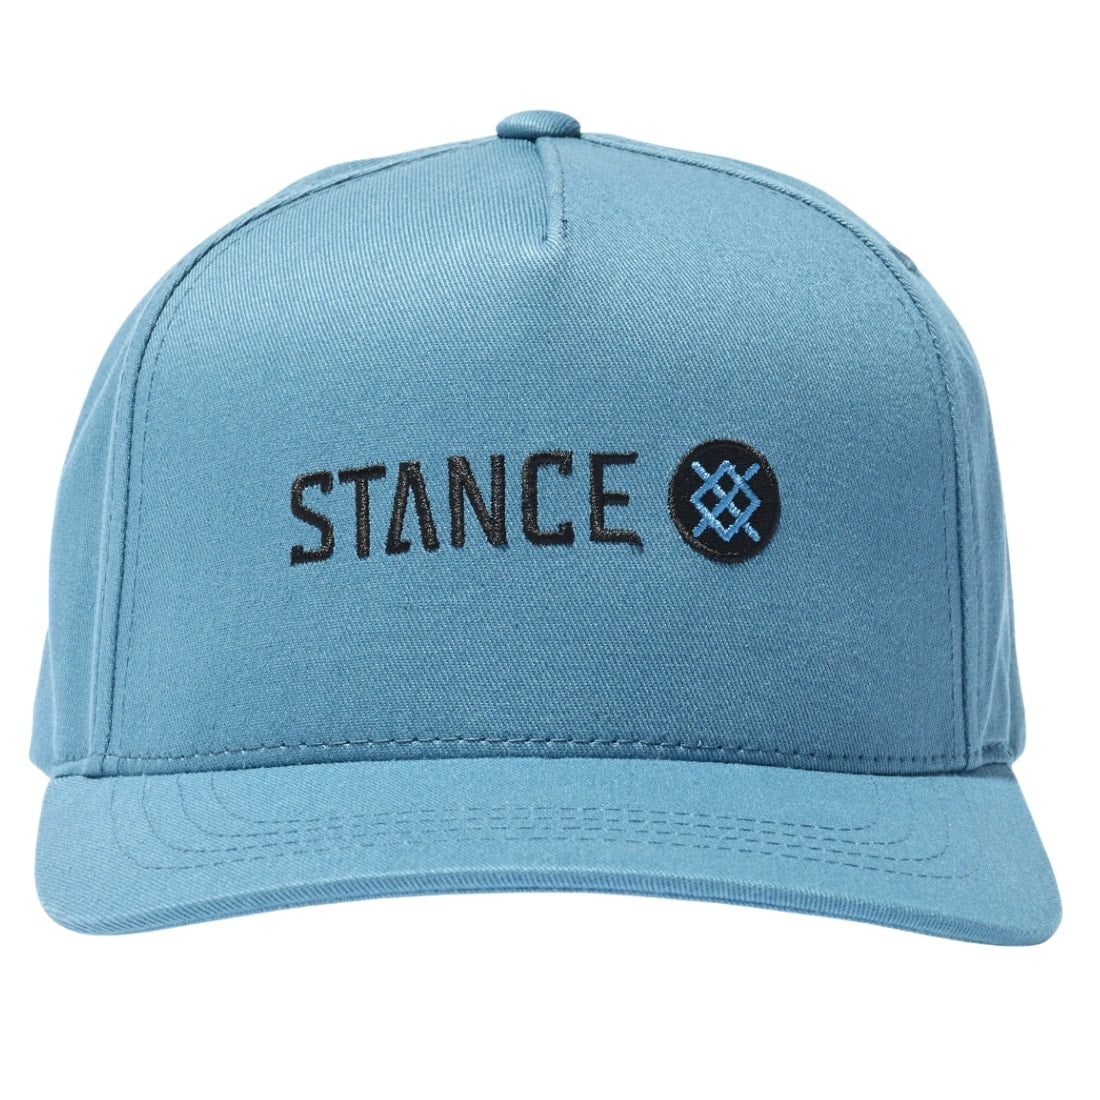 Stance Icon Snapback Cap - Blue - 5 Panel Cap by Stance One Size